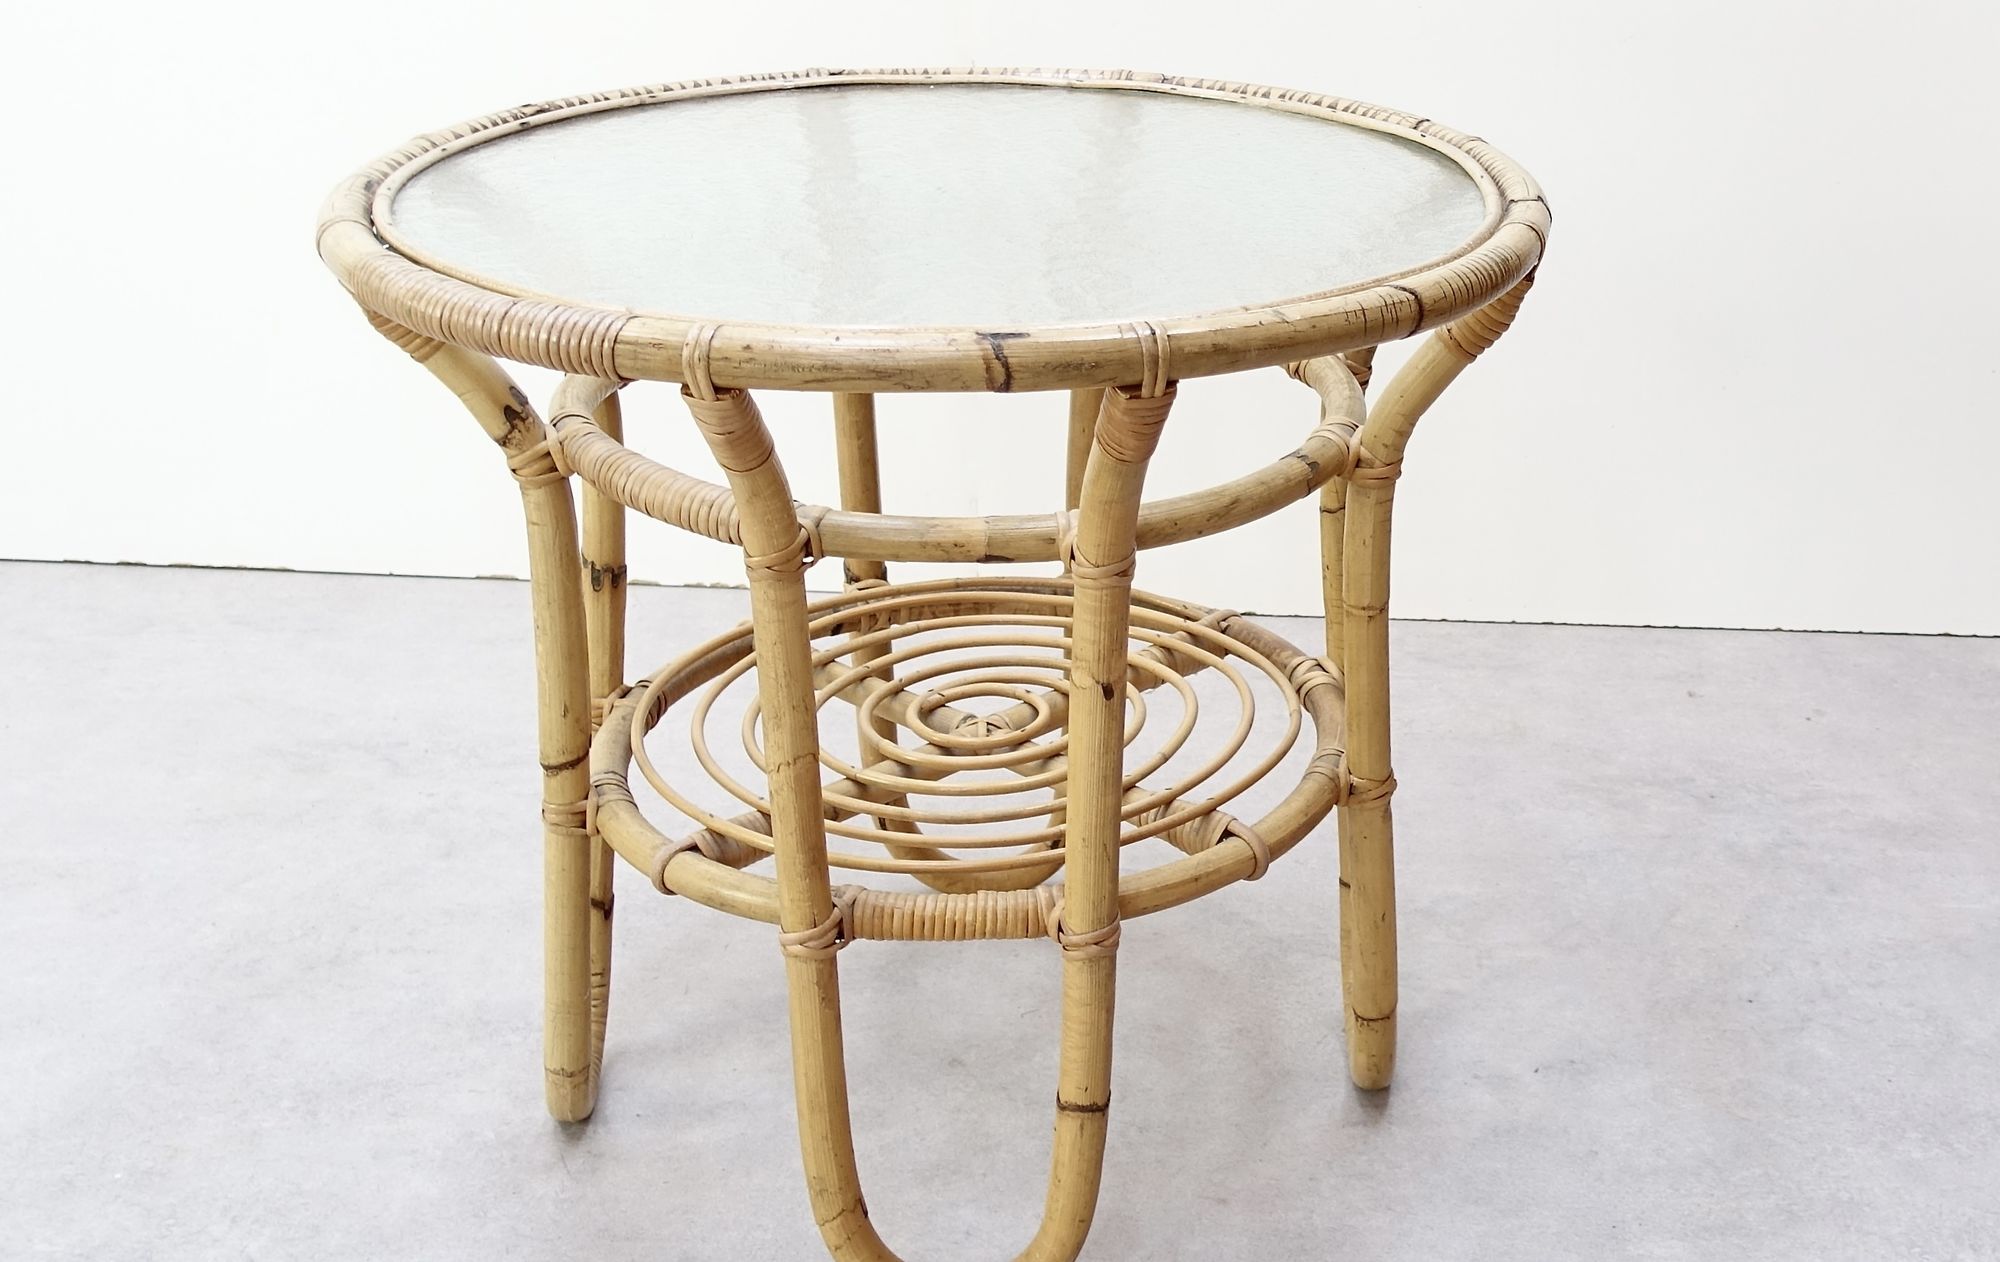 Bamboo table from the '50s-'60s